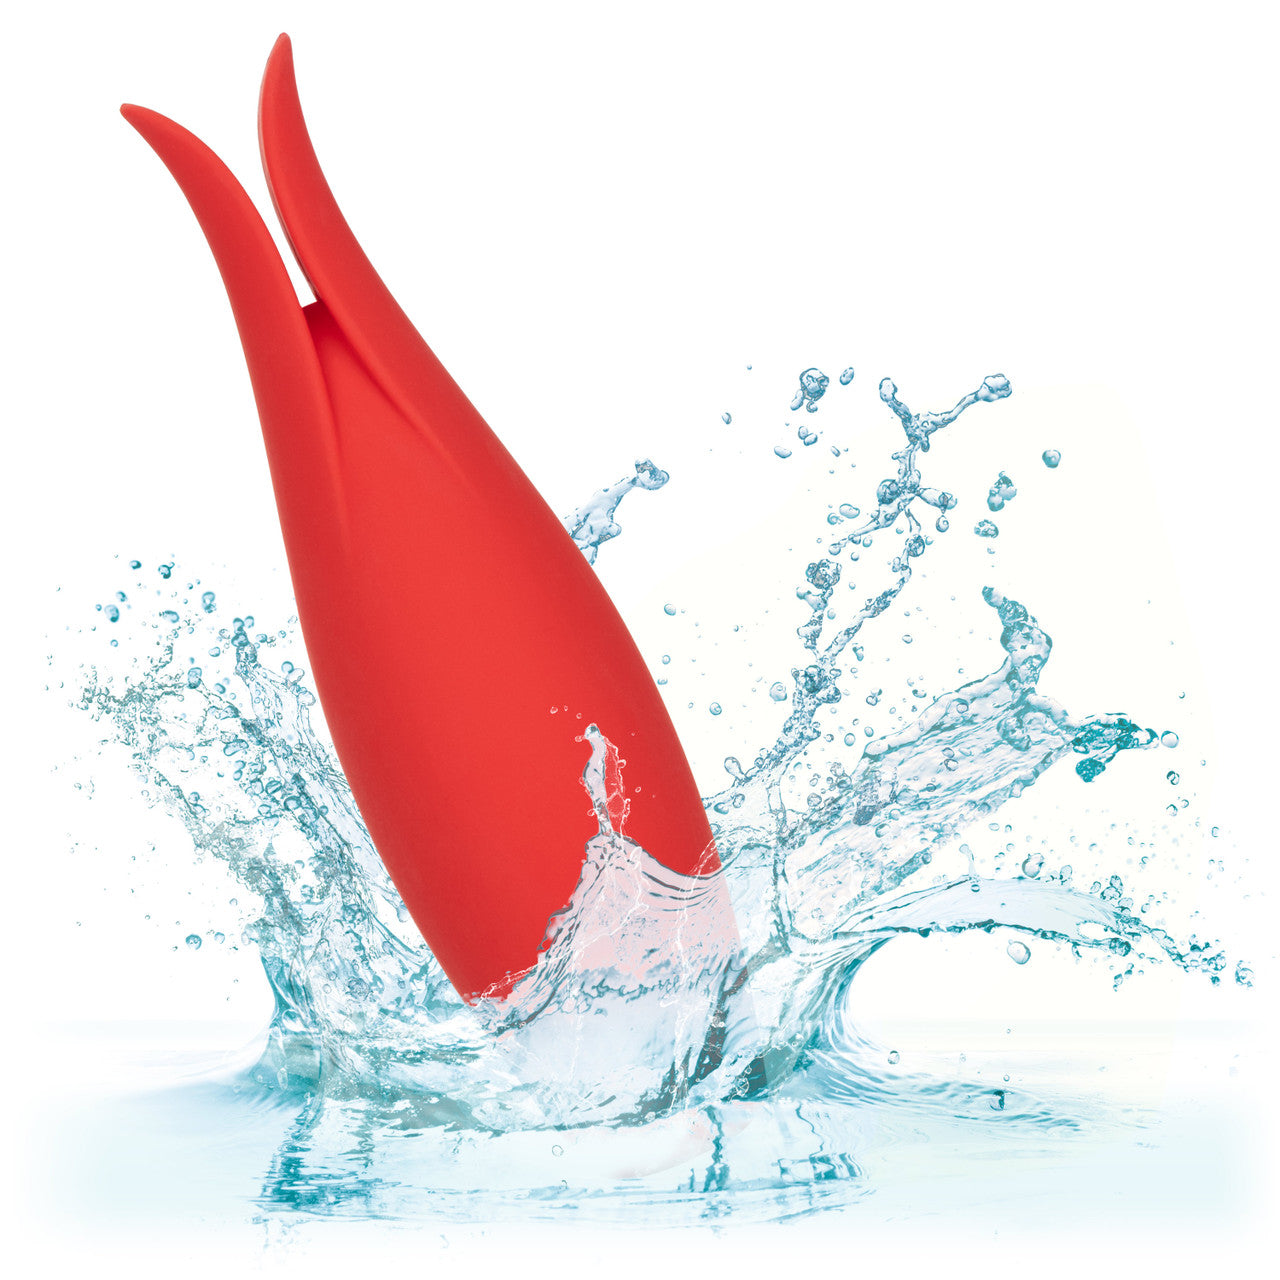 Red Hot Fury Silicone Rechargeable Clitoral Vibrator - Thorn & Feather Sex Toy Canada